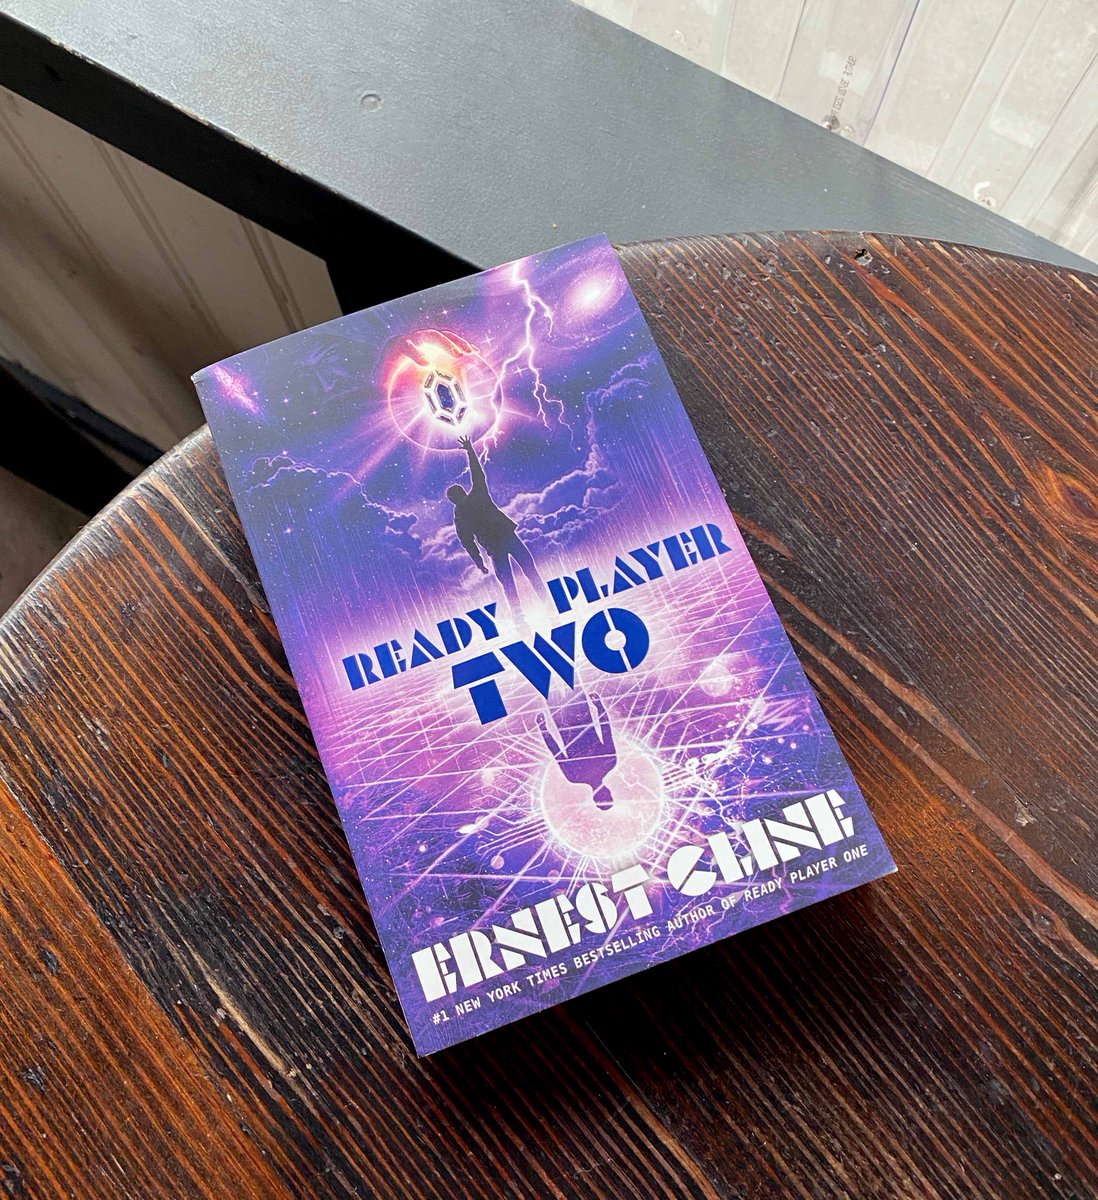 The thrilling sequel to the beloved worldwide bestseller READY PLAYER ONE, is now out in paperback! Get yours: https://t.co/nVlv8udRHw https://t.co/H4Z4F0pTD2